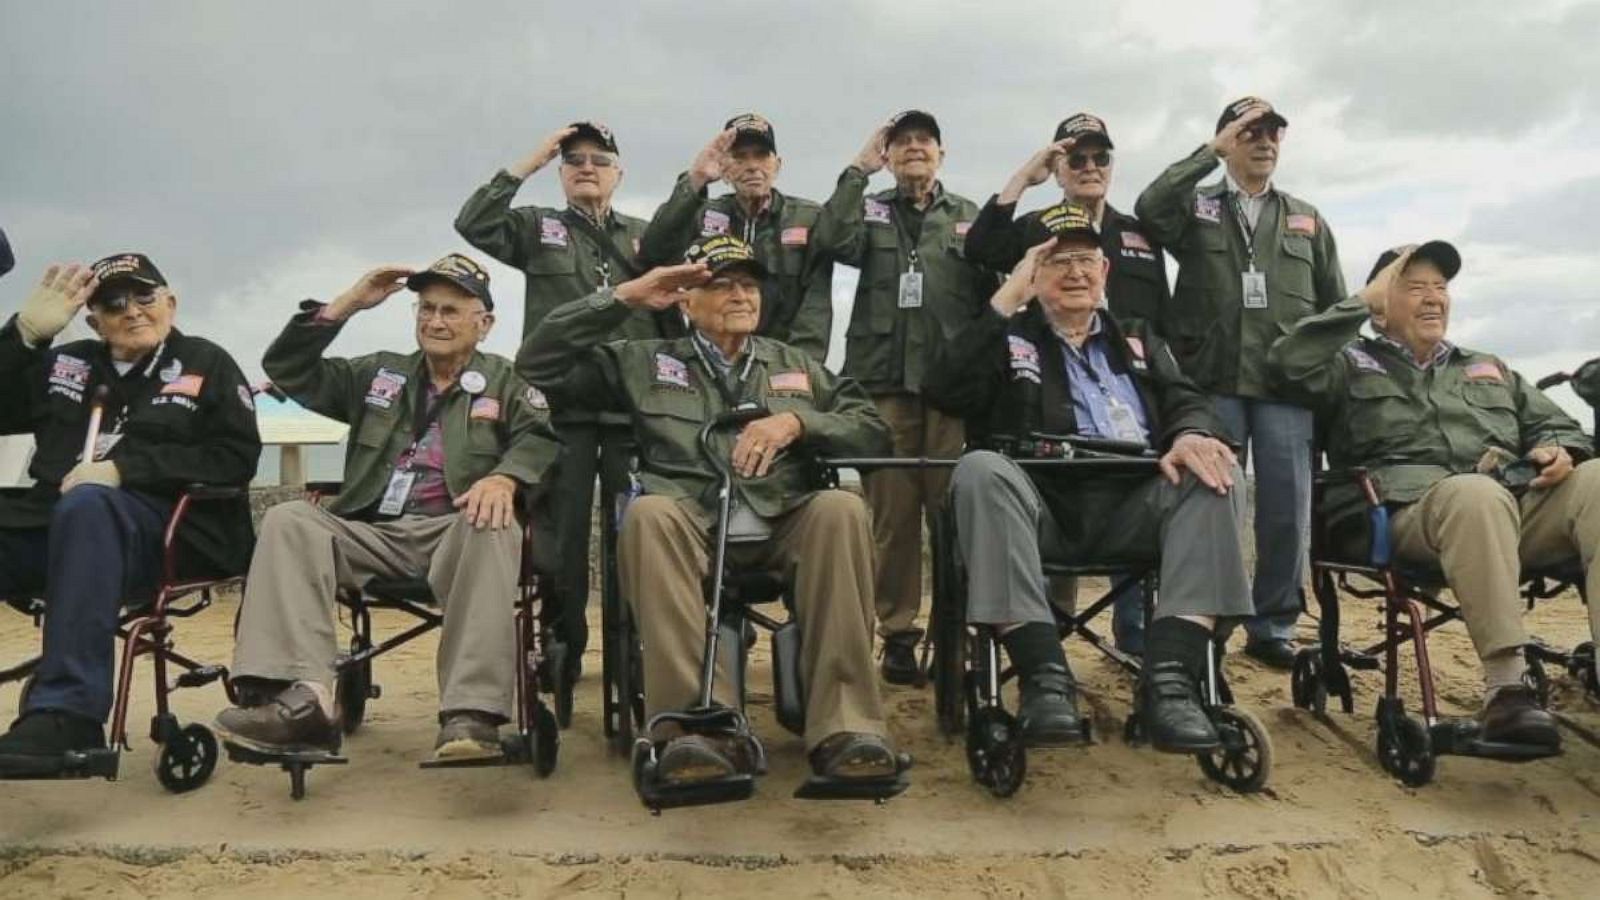 World War II veterans return to Normandy for 75th D-Day anniversary: 'You  can't forget' - ABC News